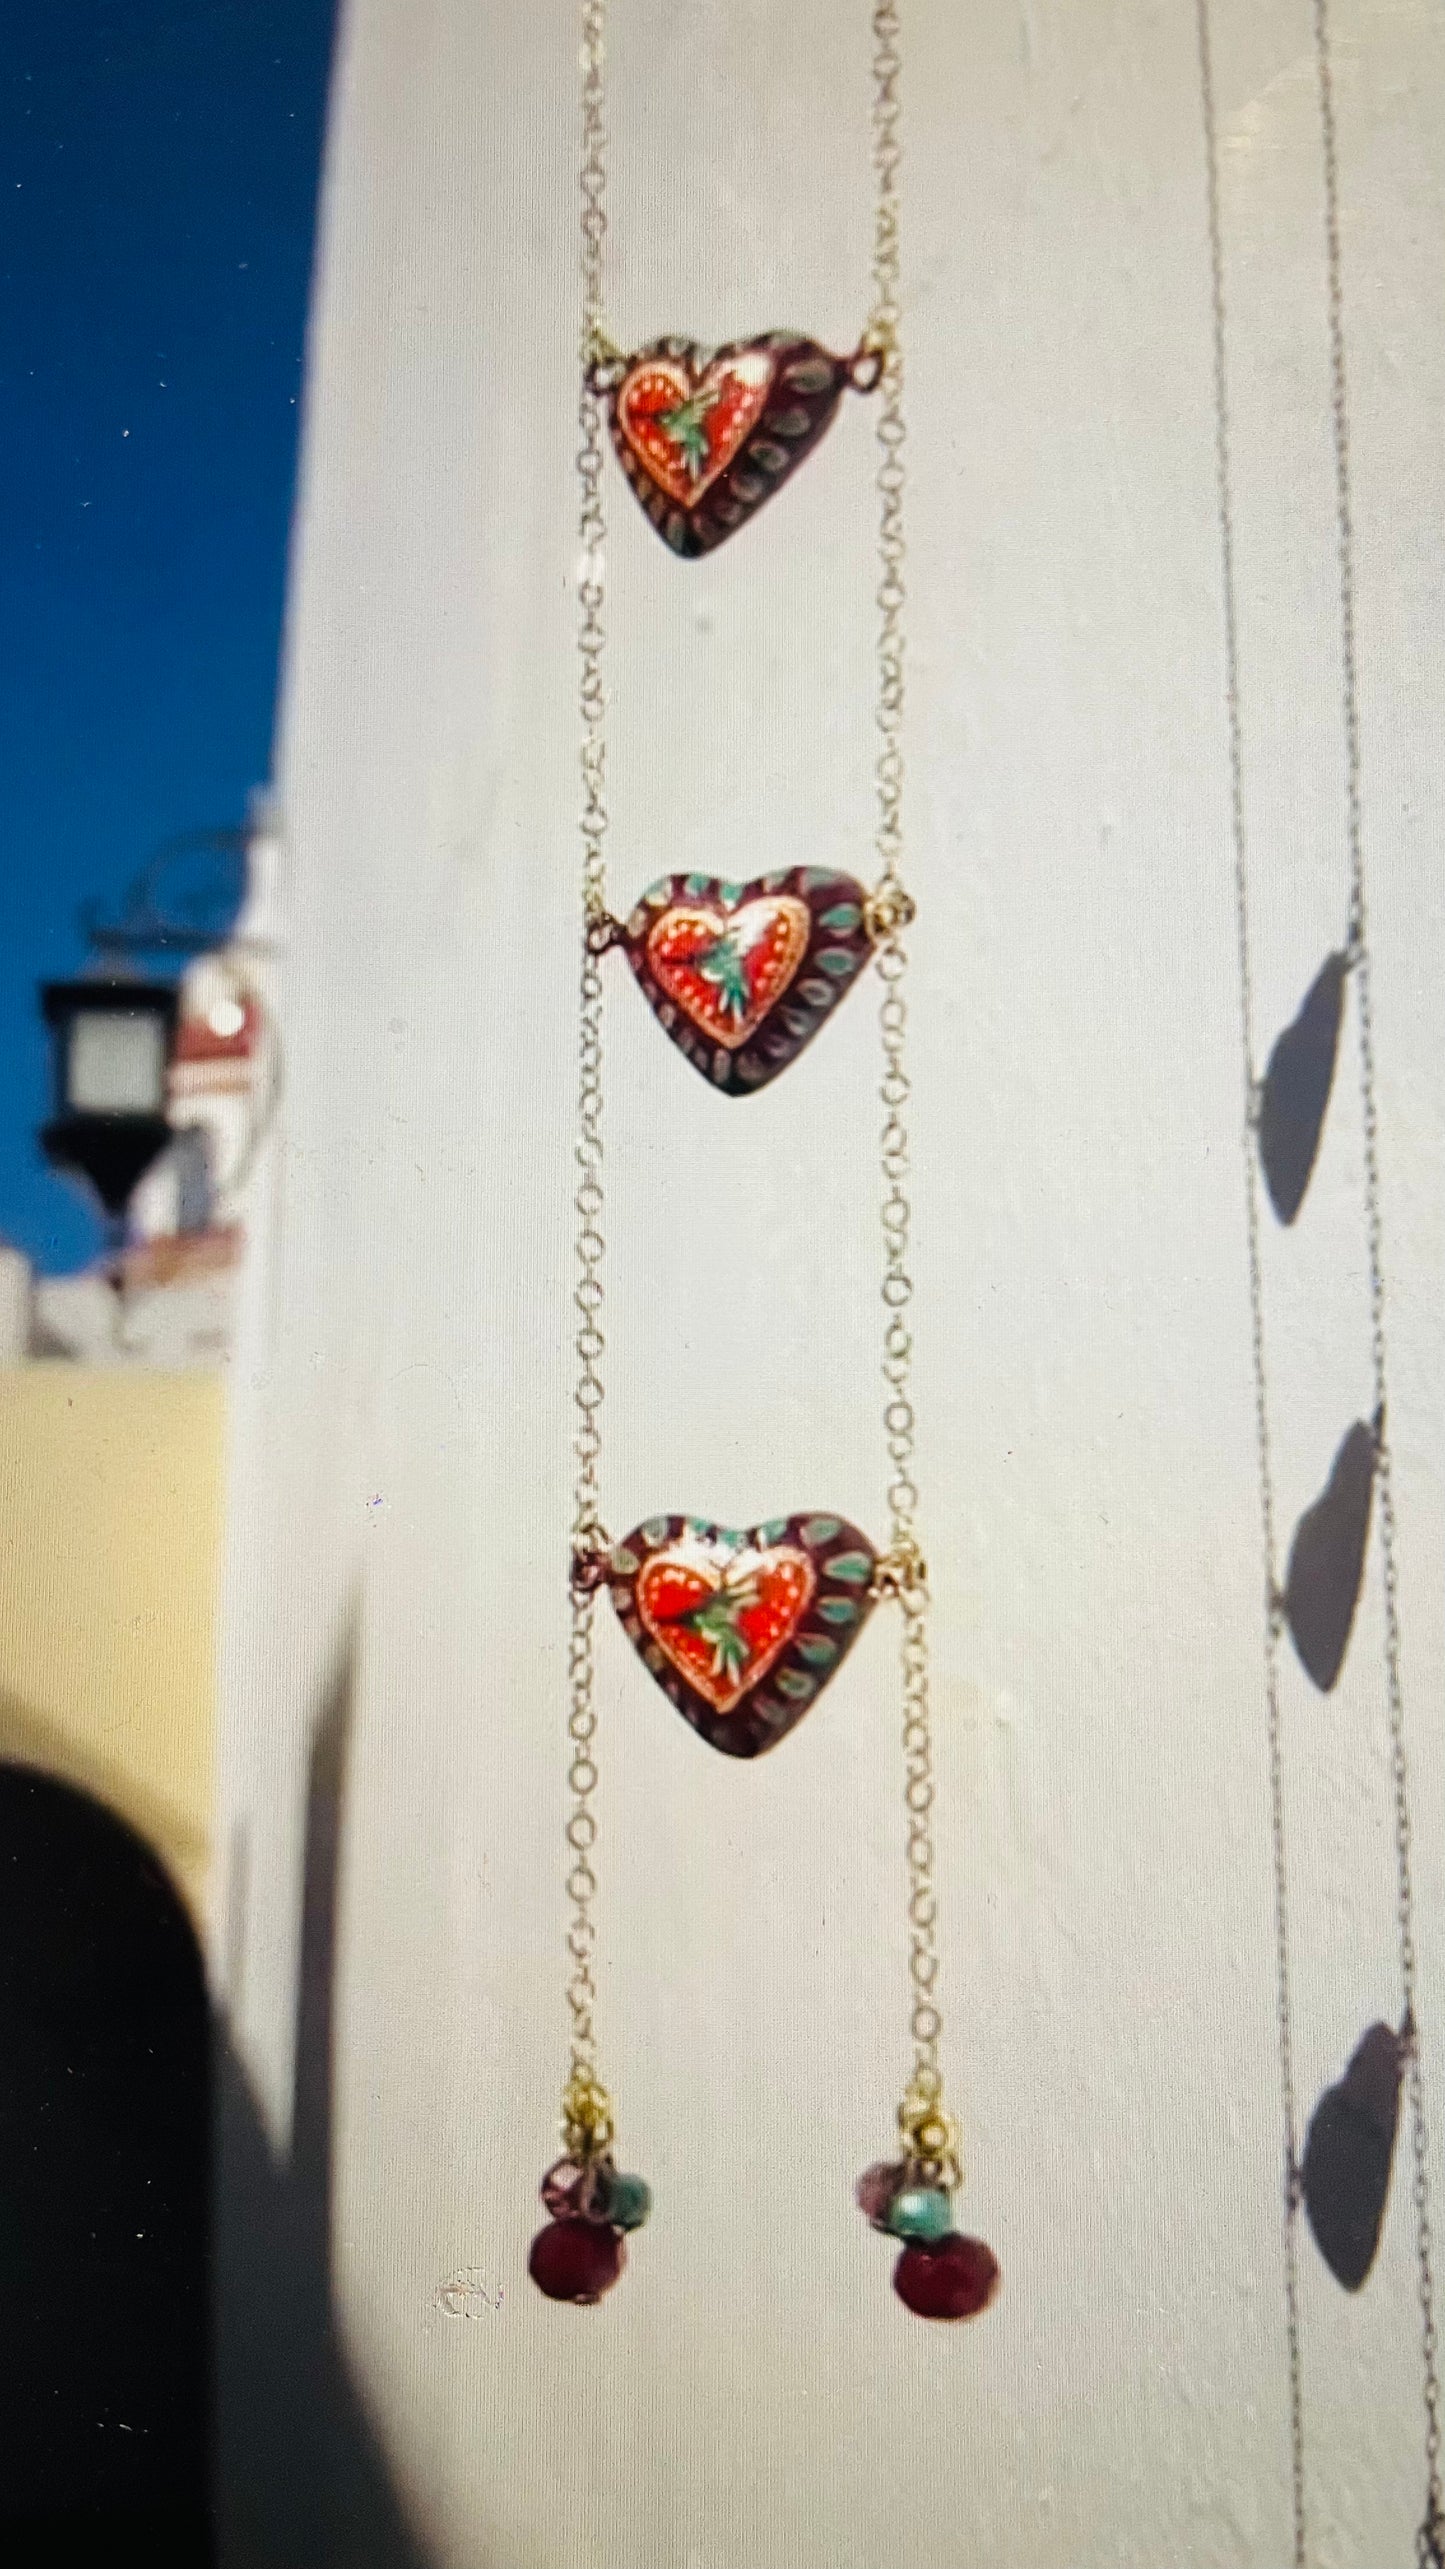 Triple heart-shaped necklace with hand-painted red and green colibri